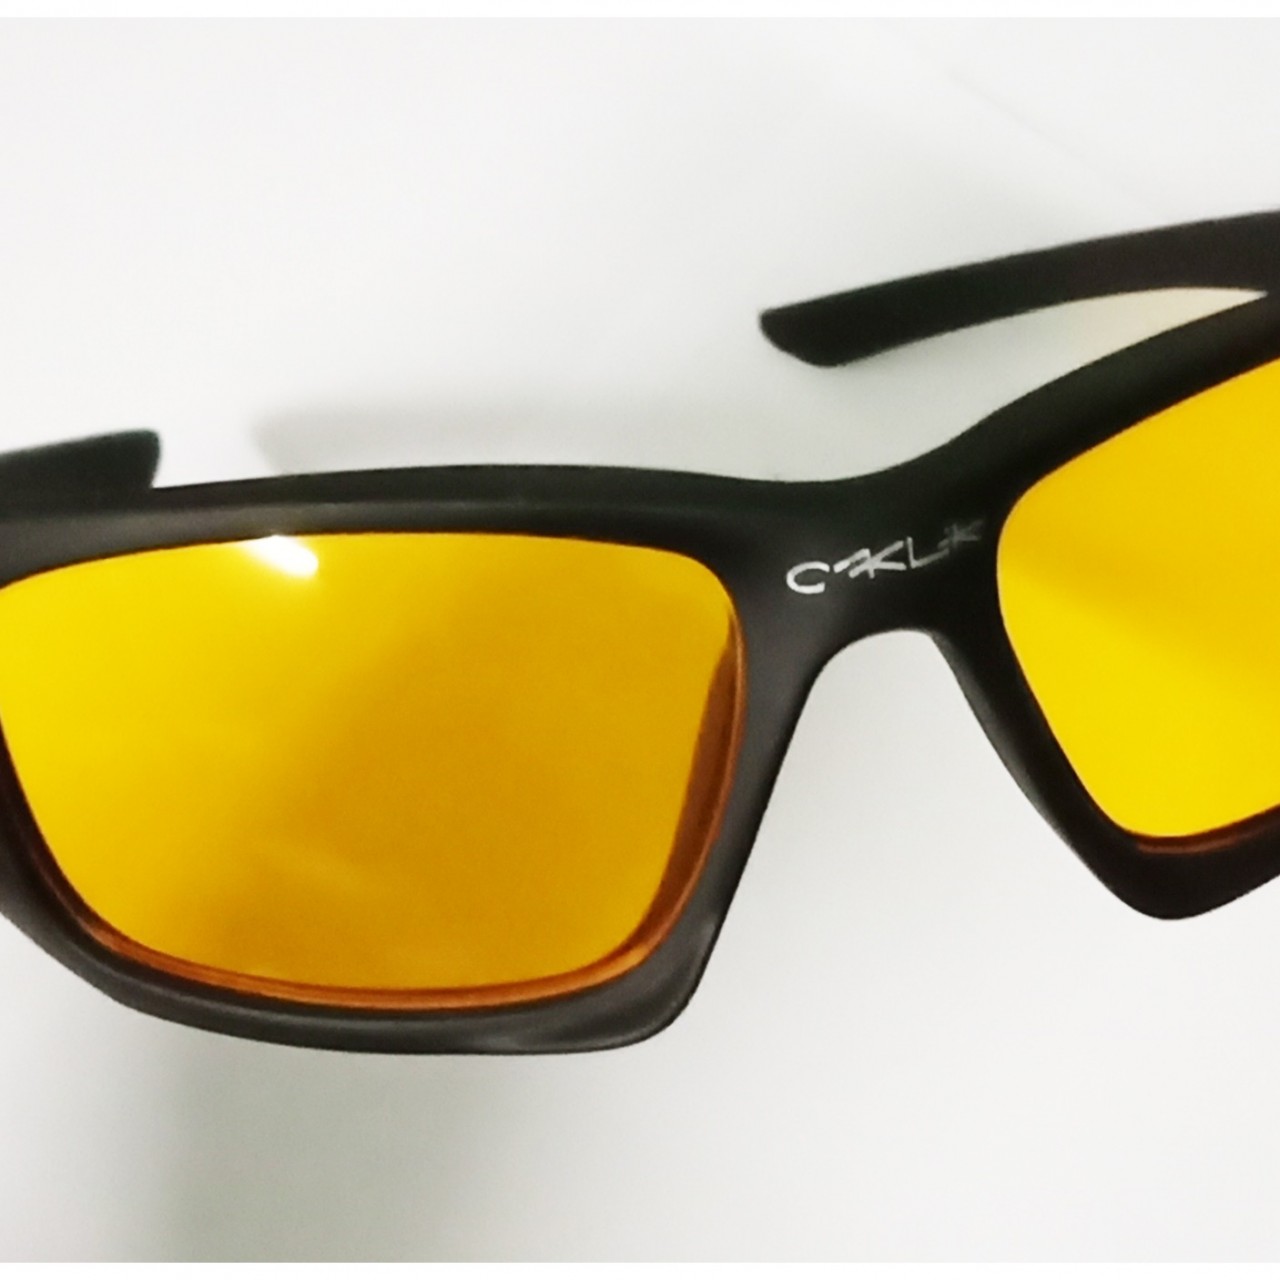 Night Vision Hd Glasses In Yellow Color